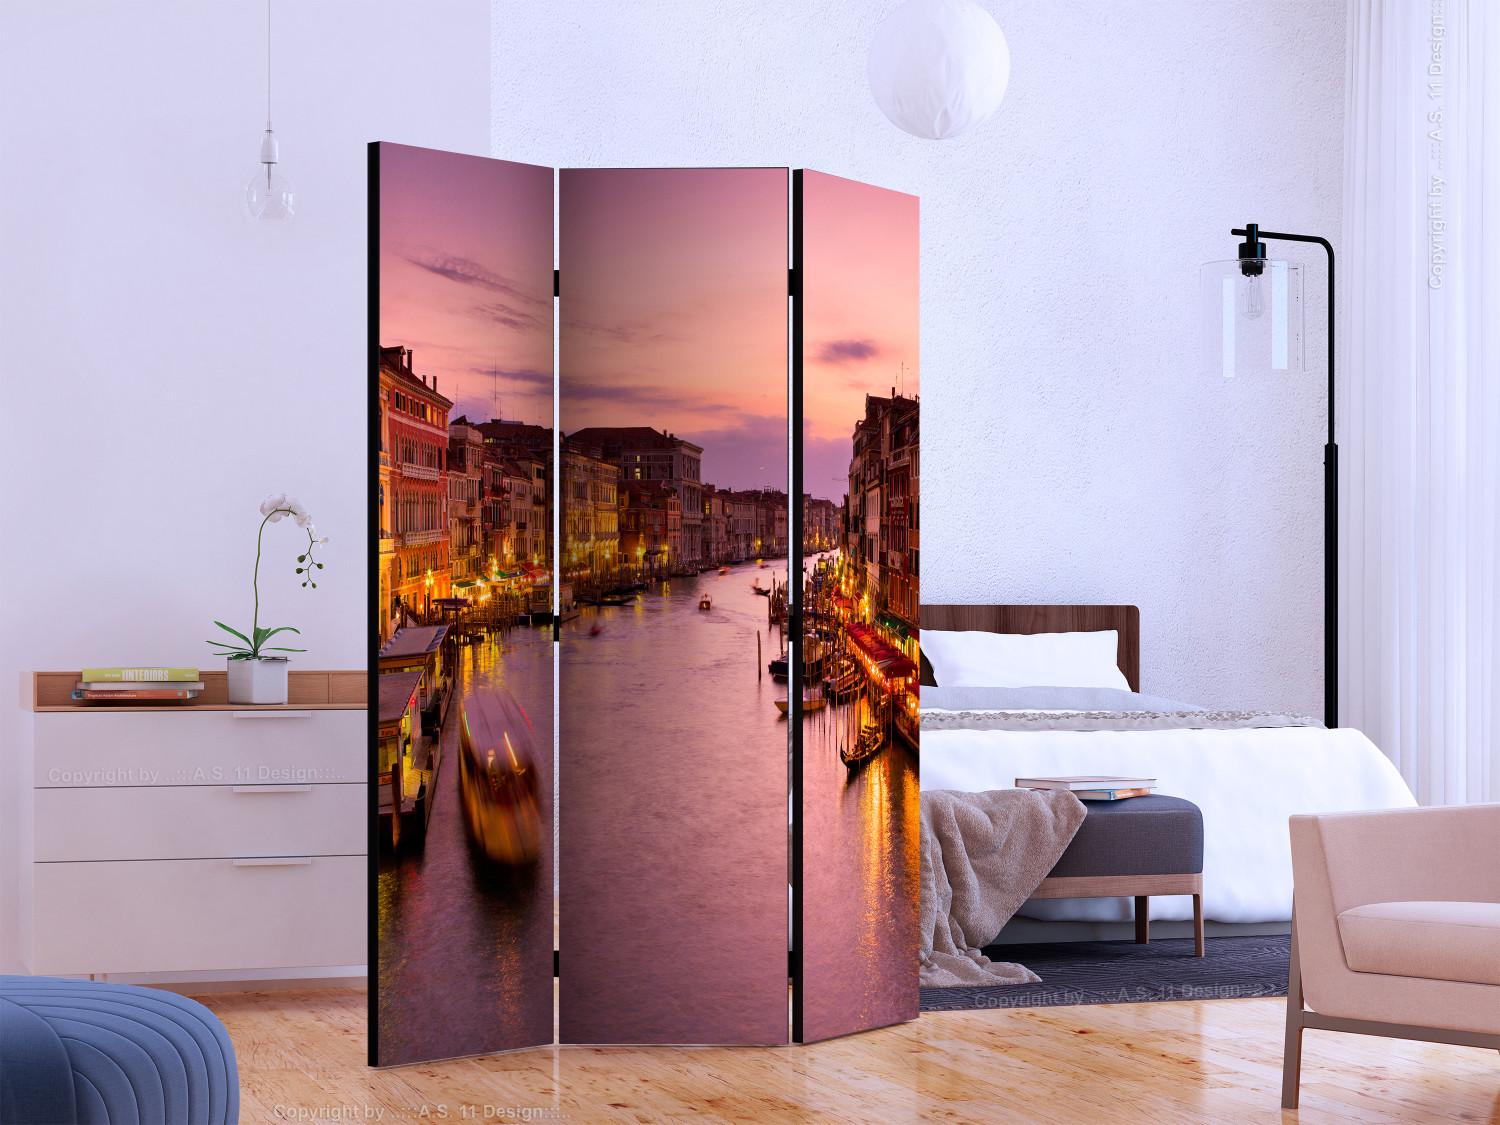 Room Divider City of Lovers - Venice at Night (3-piece) - architecture and river